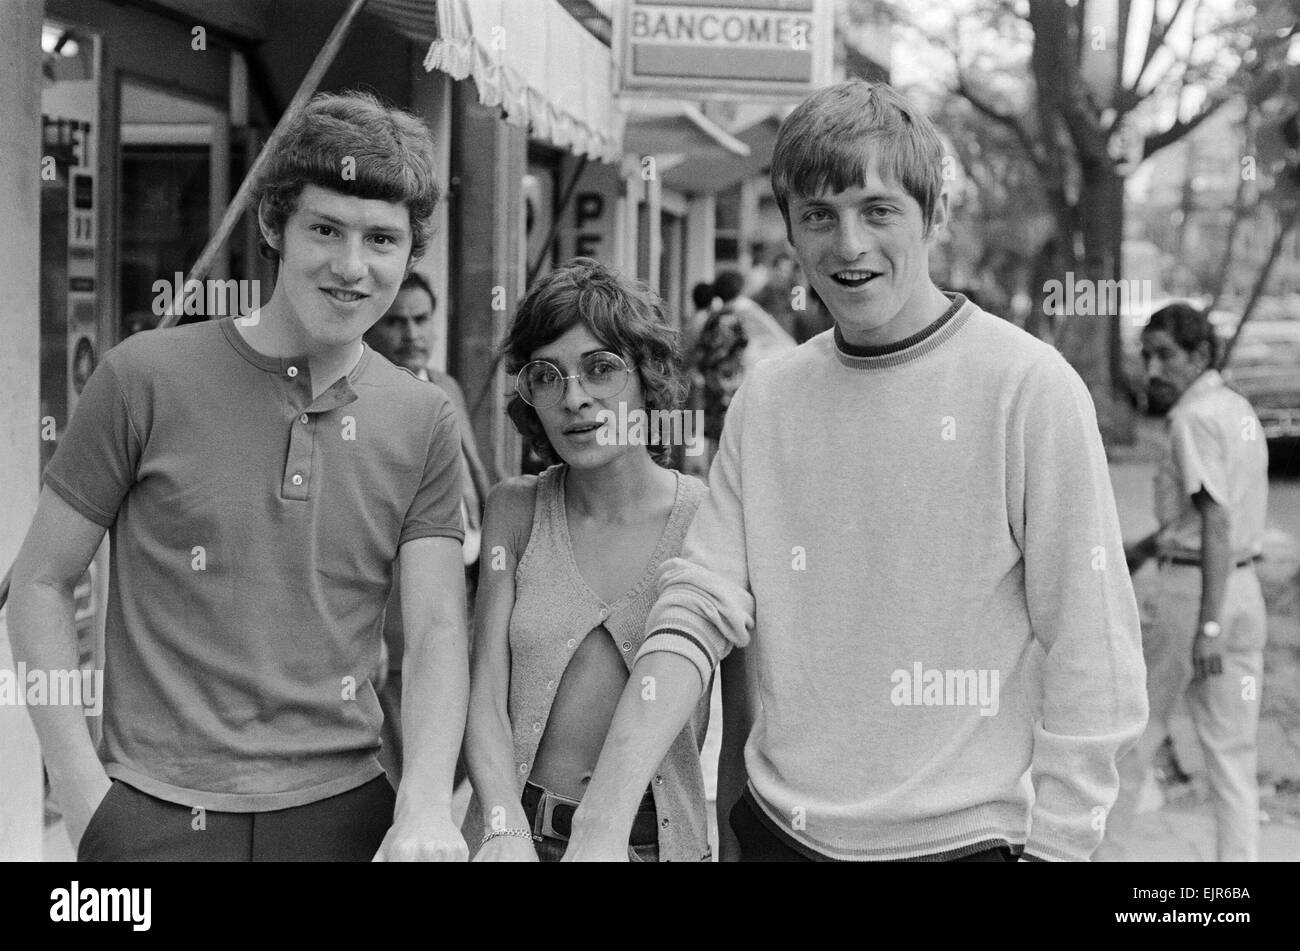 1970 World Cup Finals in Mexico. England footballer Brian Kidd (left) and Allan Clarke pose with a woman, showing off their tanned arms, as the team stroll around the Zona Rosa part of Mexico City during their shopping trip there. 11th May 1970. Stock Photo